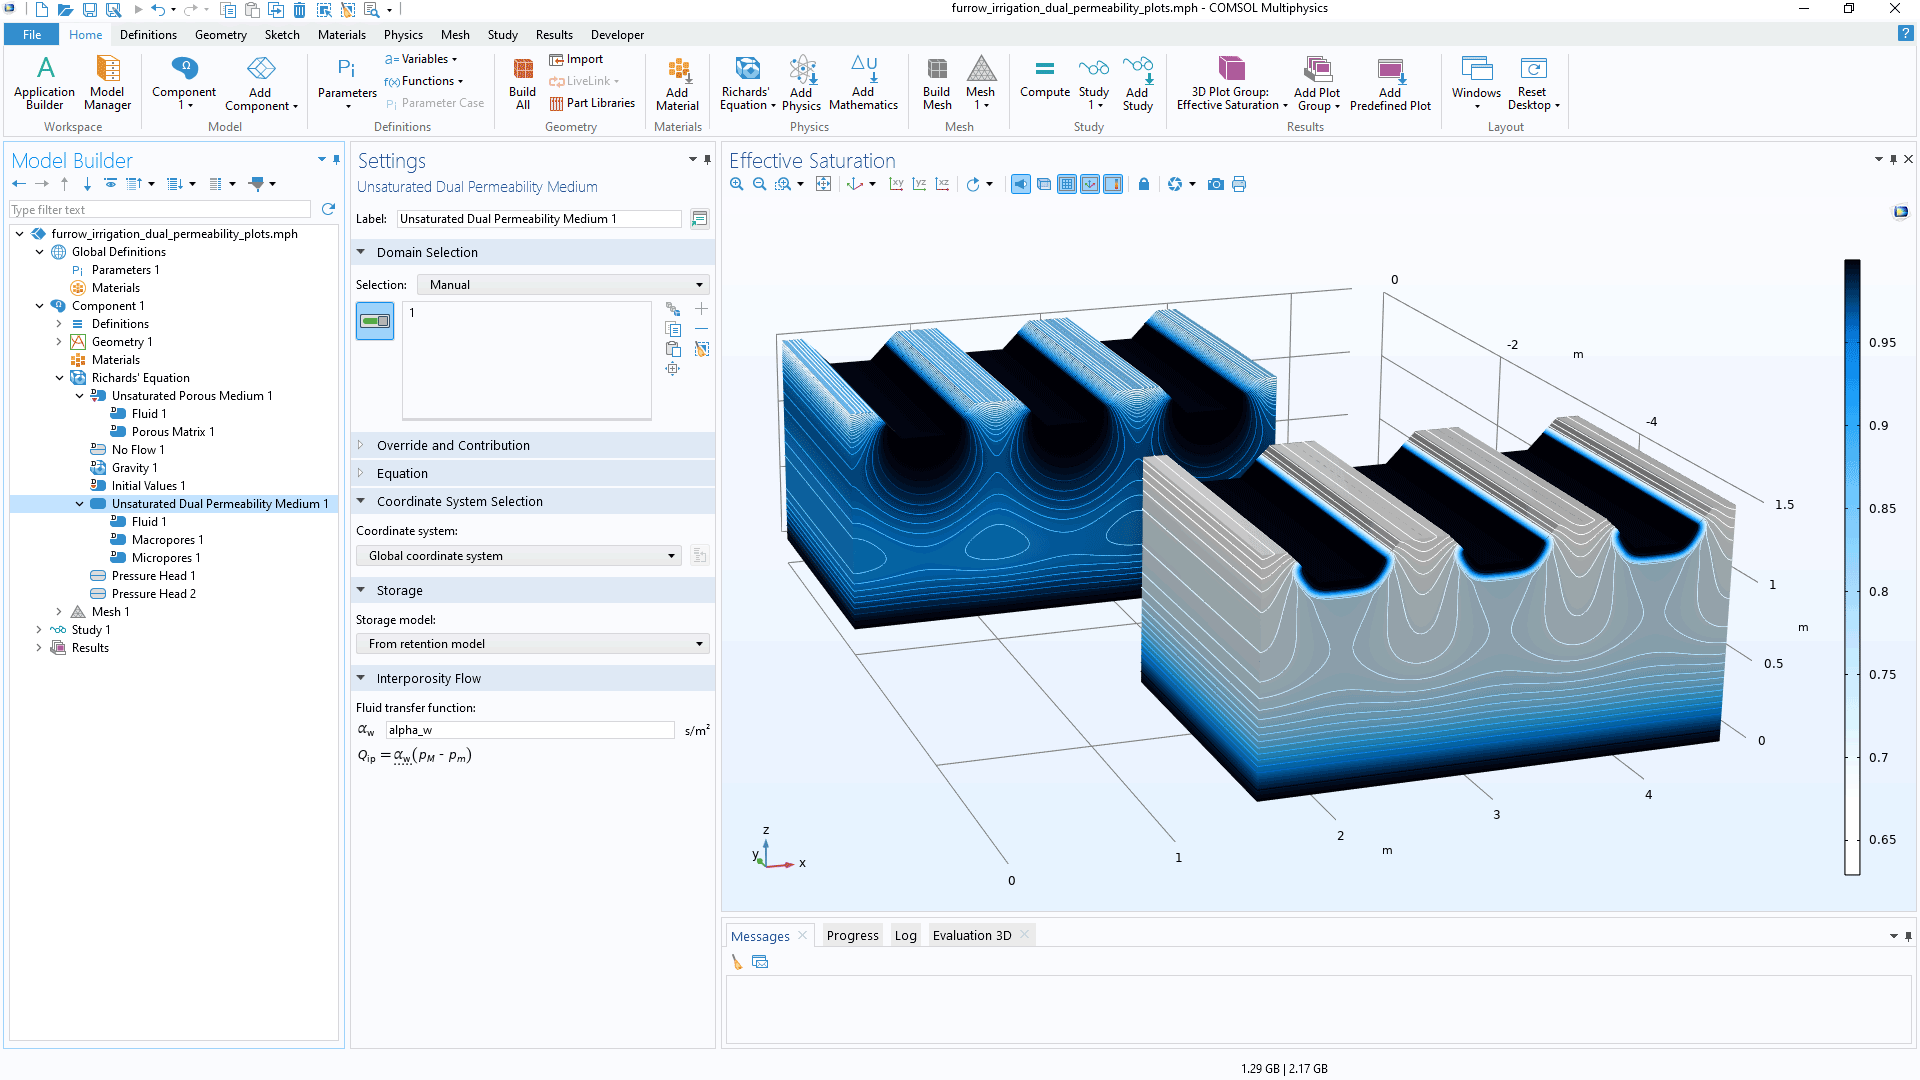 The COMSOL Multiphysics UI showing the Model Builder with the Unsaturated Dual Permeability Medium node highlighted, the corresponding Settings window, and the Furrow Irrigation — Dual Permeability model in the Graphics window.